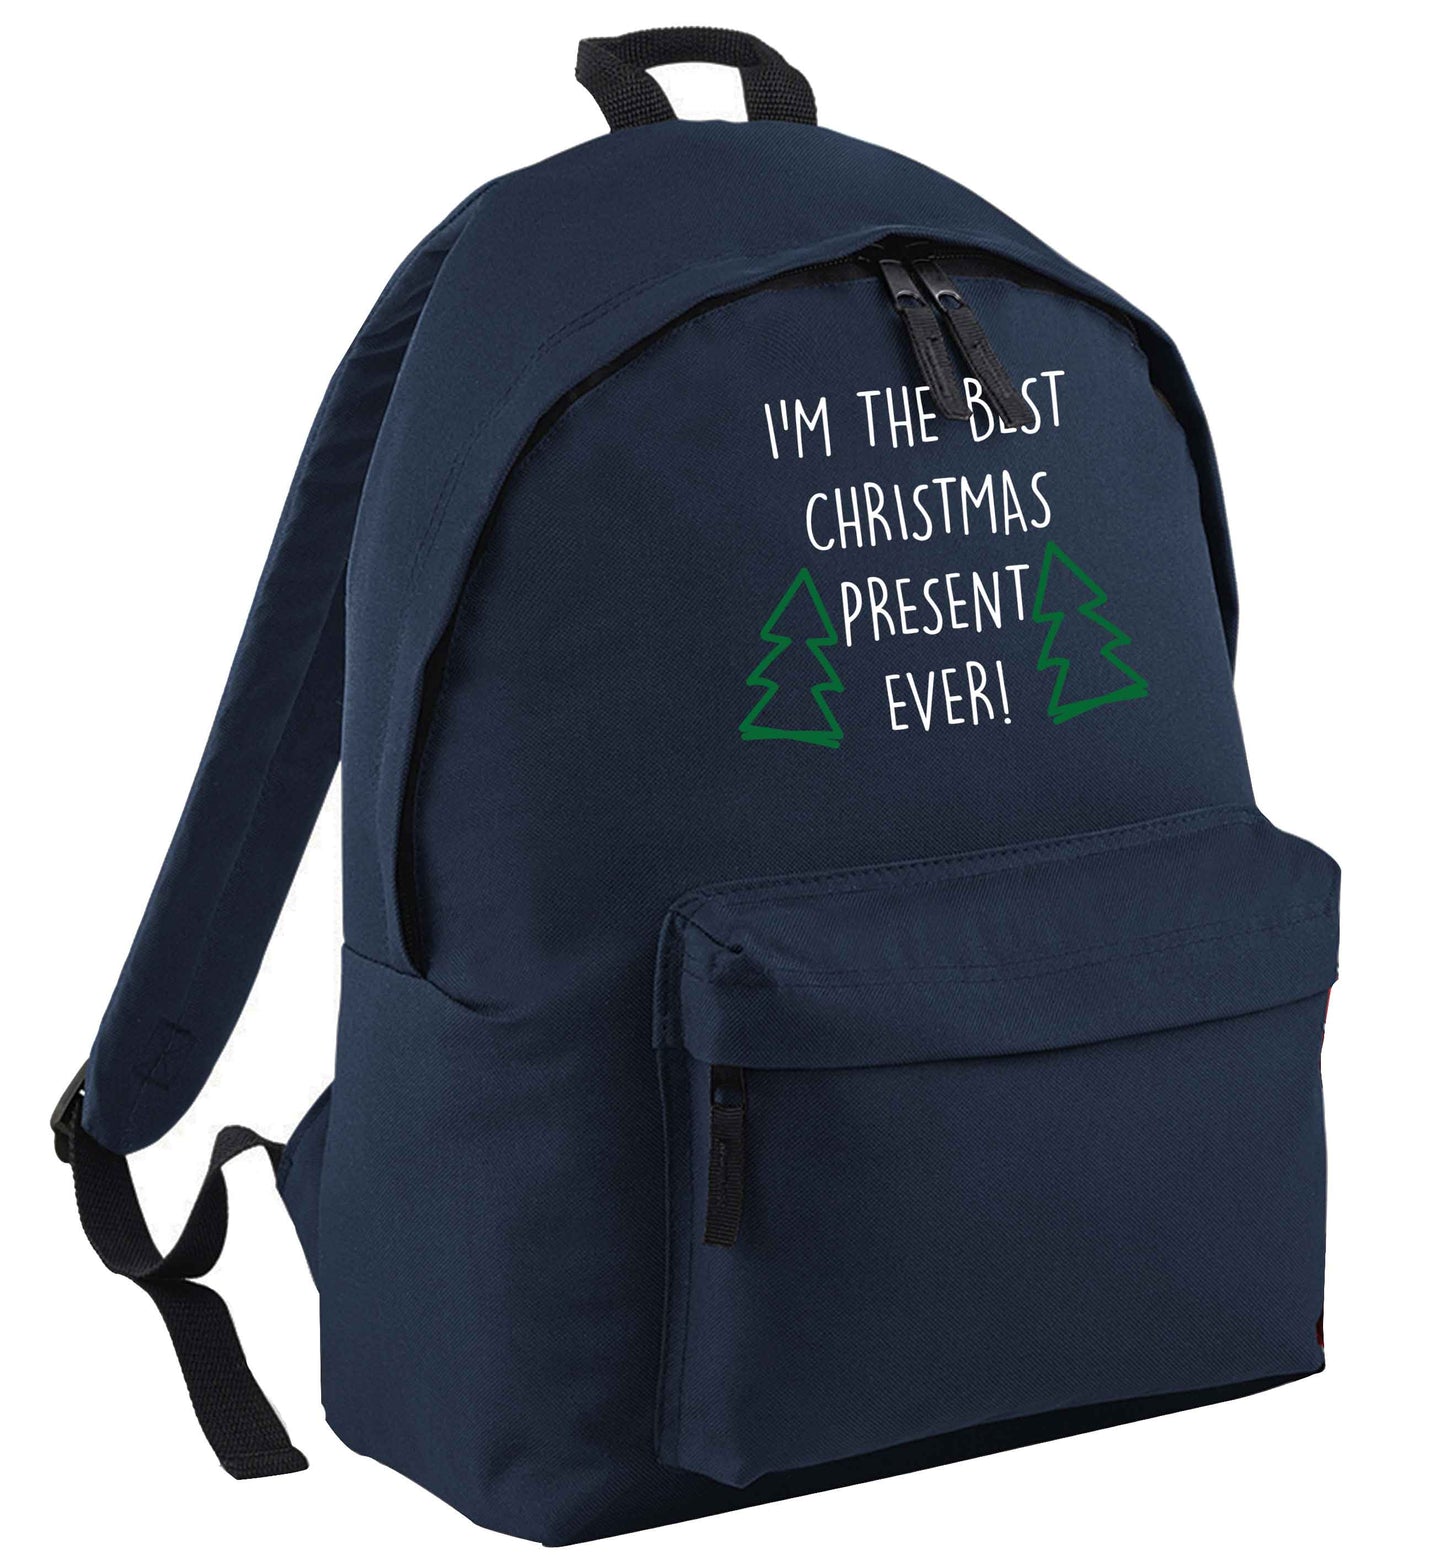 I'm the best Christmas present ever navy adults backpack